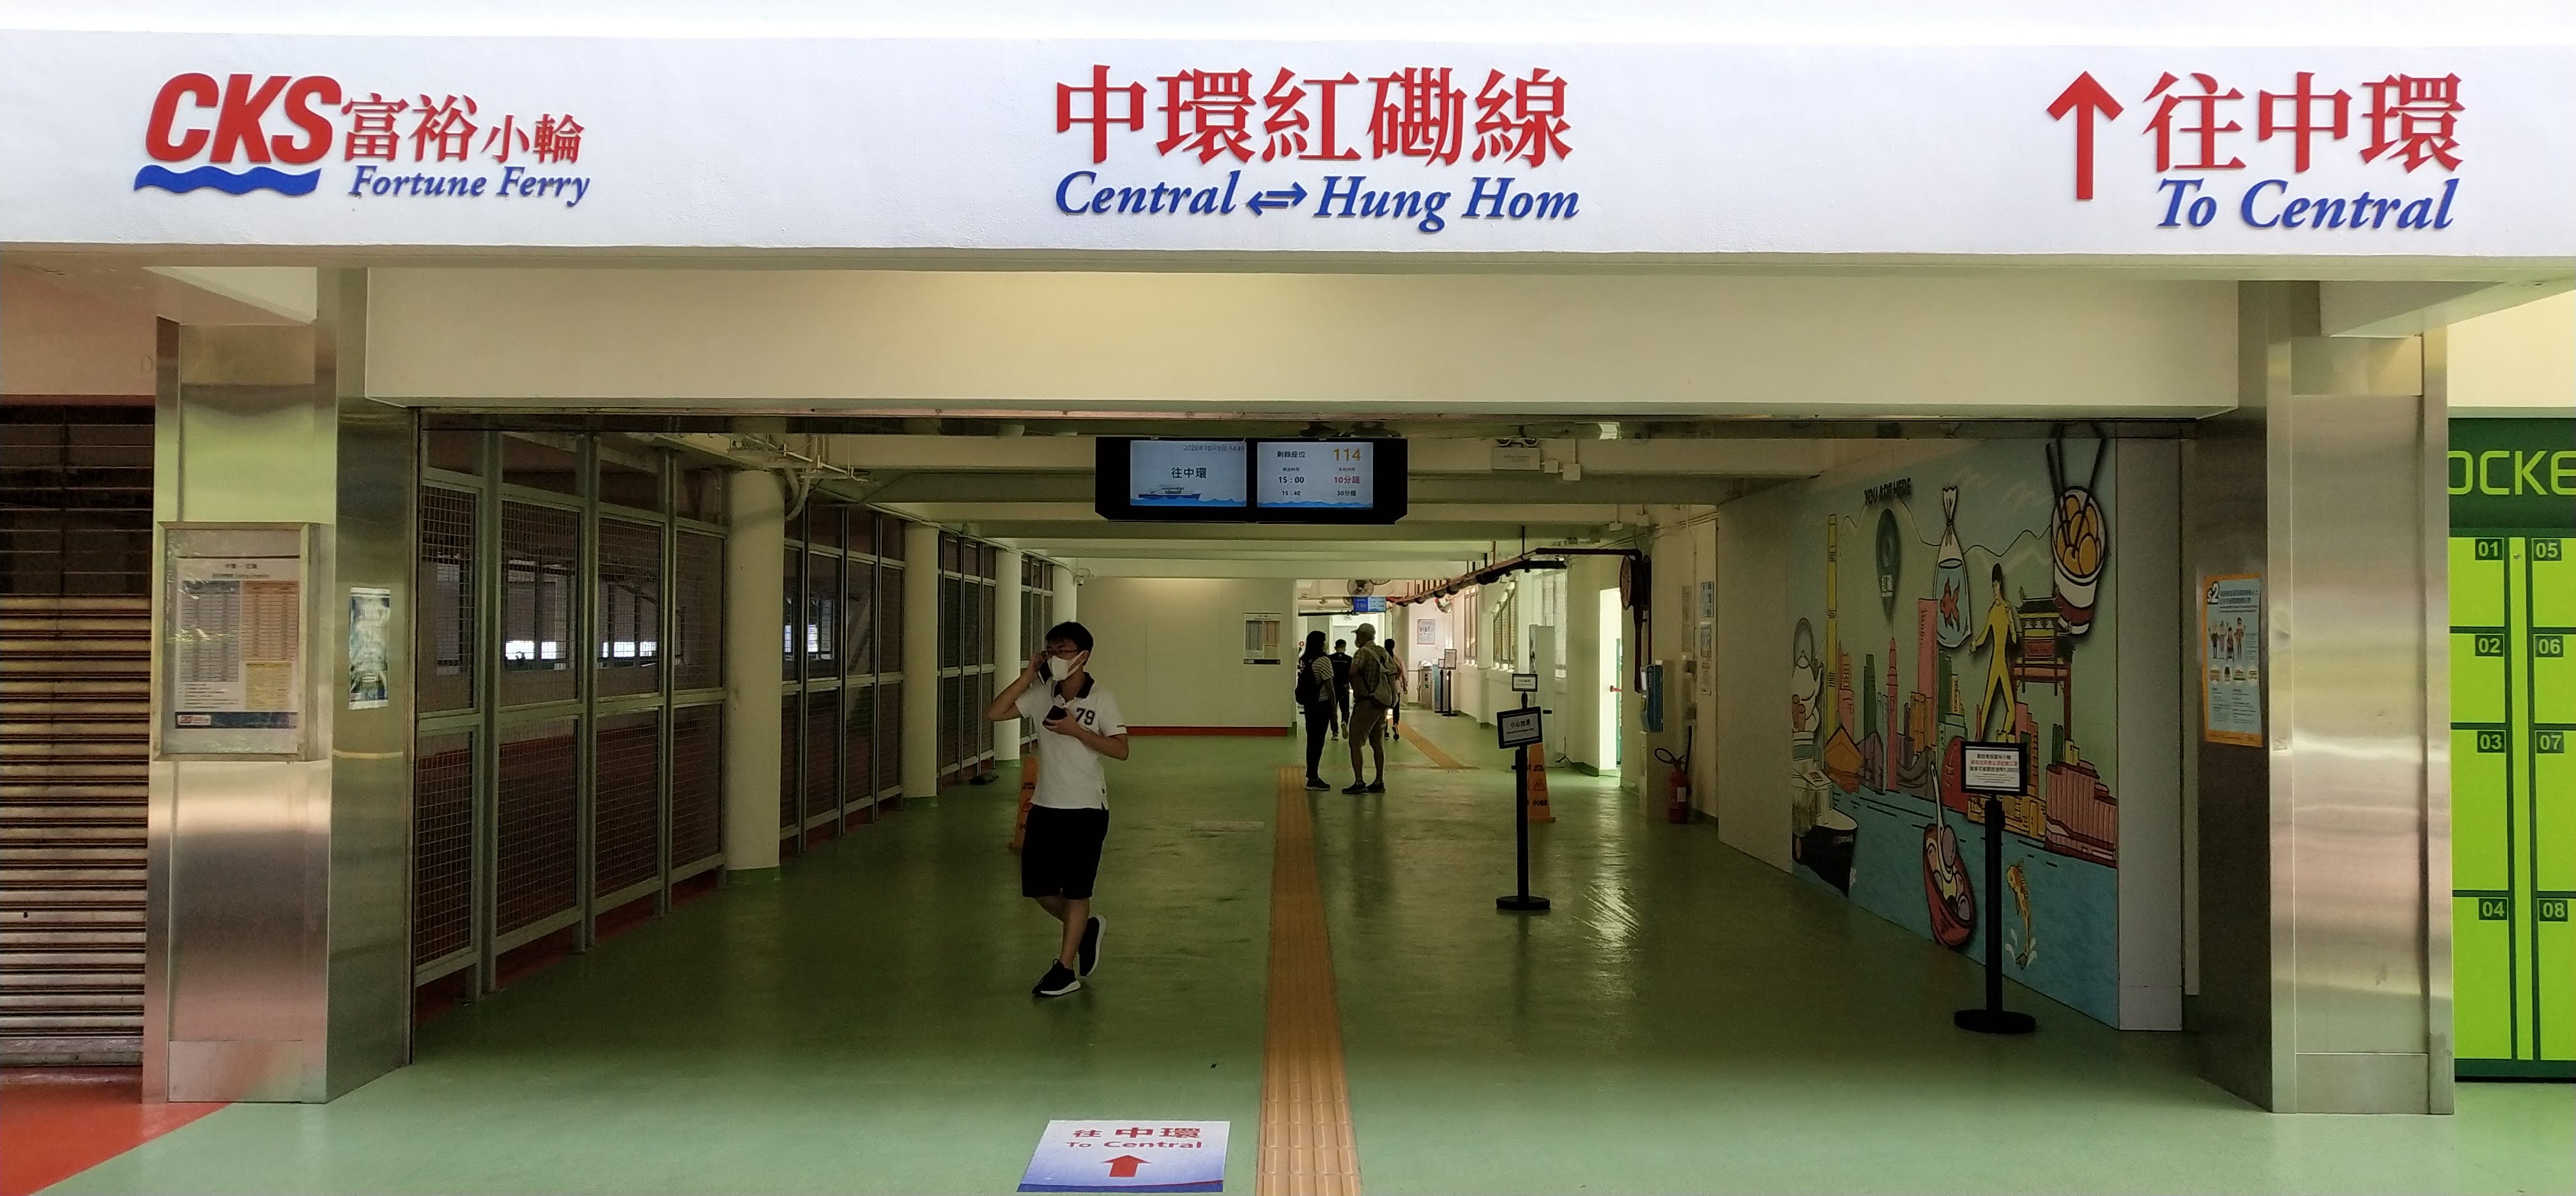 The entrance of the pier. Remember this is the Hung Hom (South) Ferry Pier.